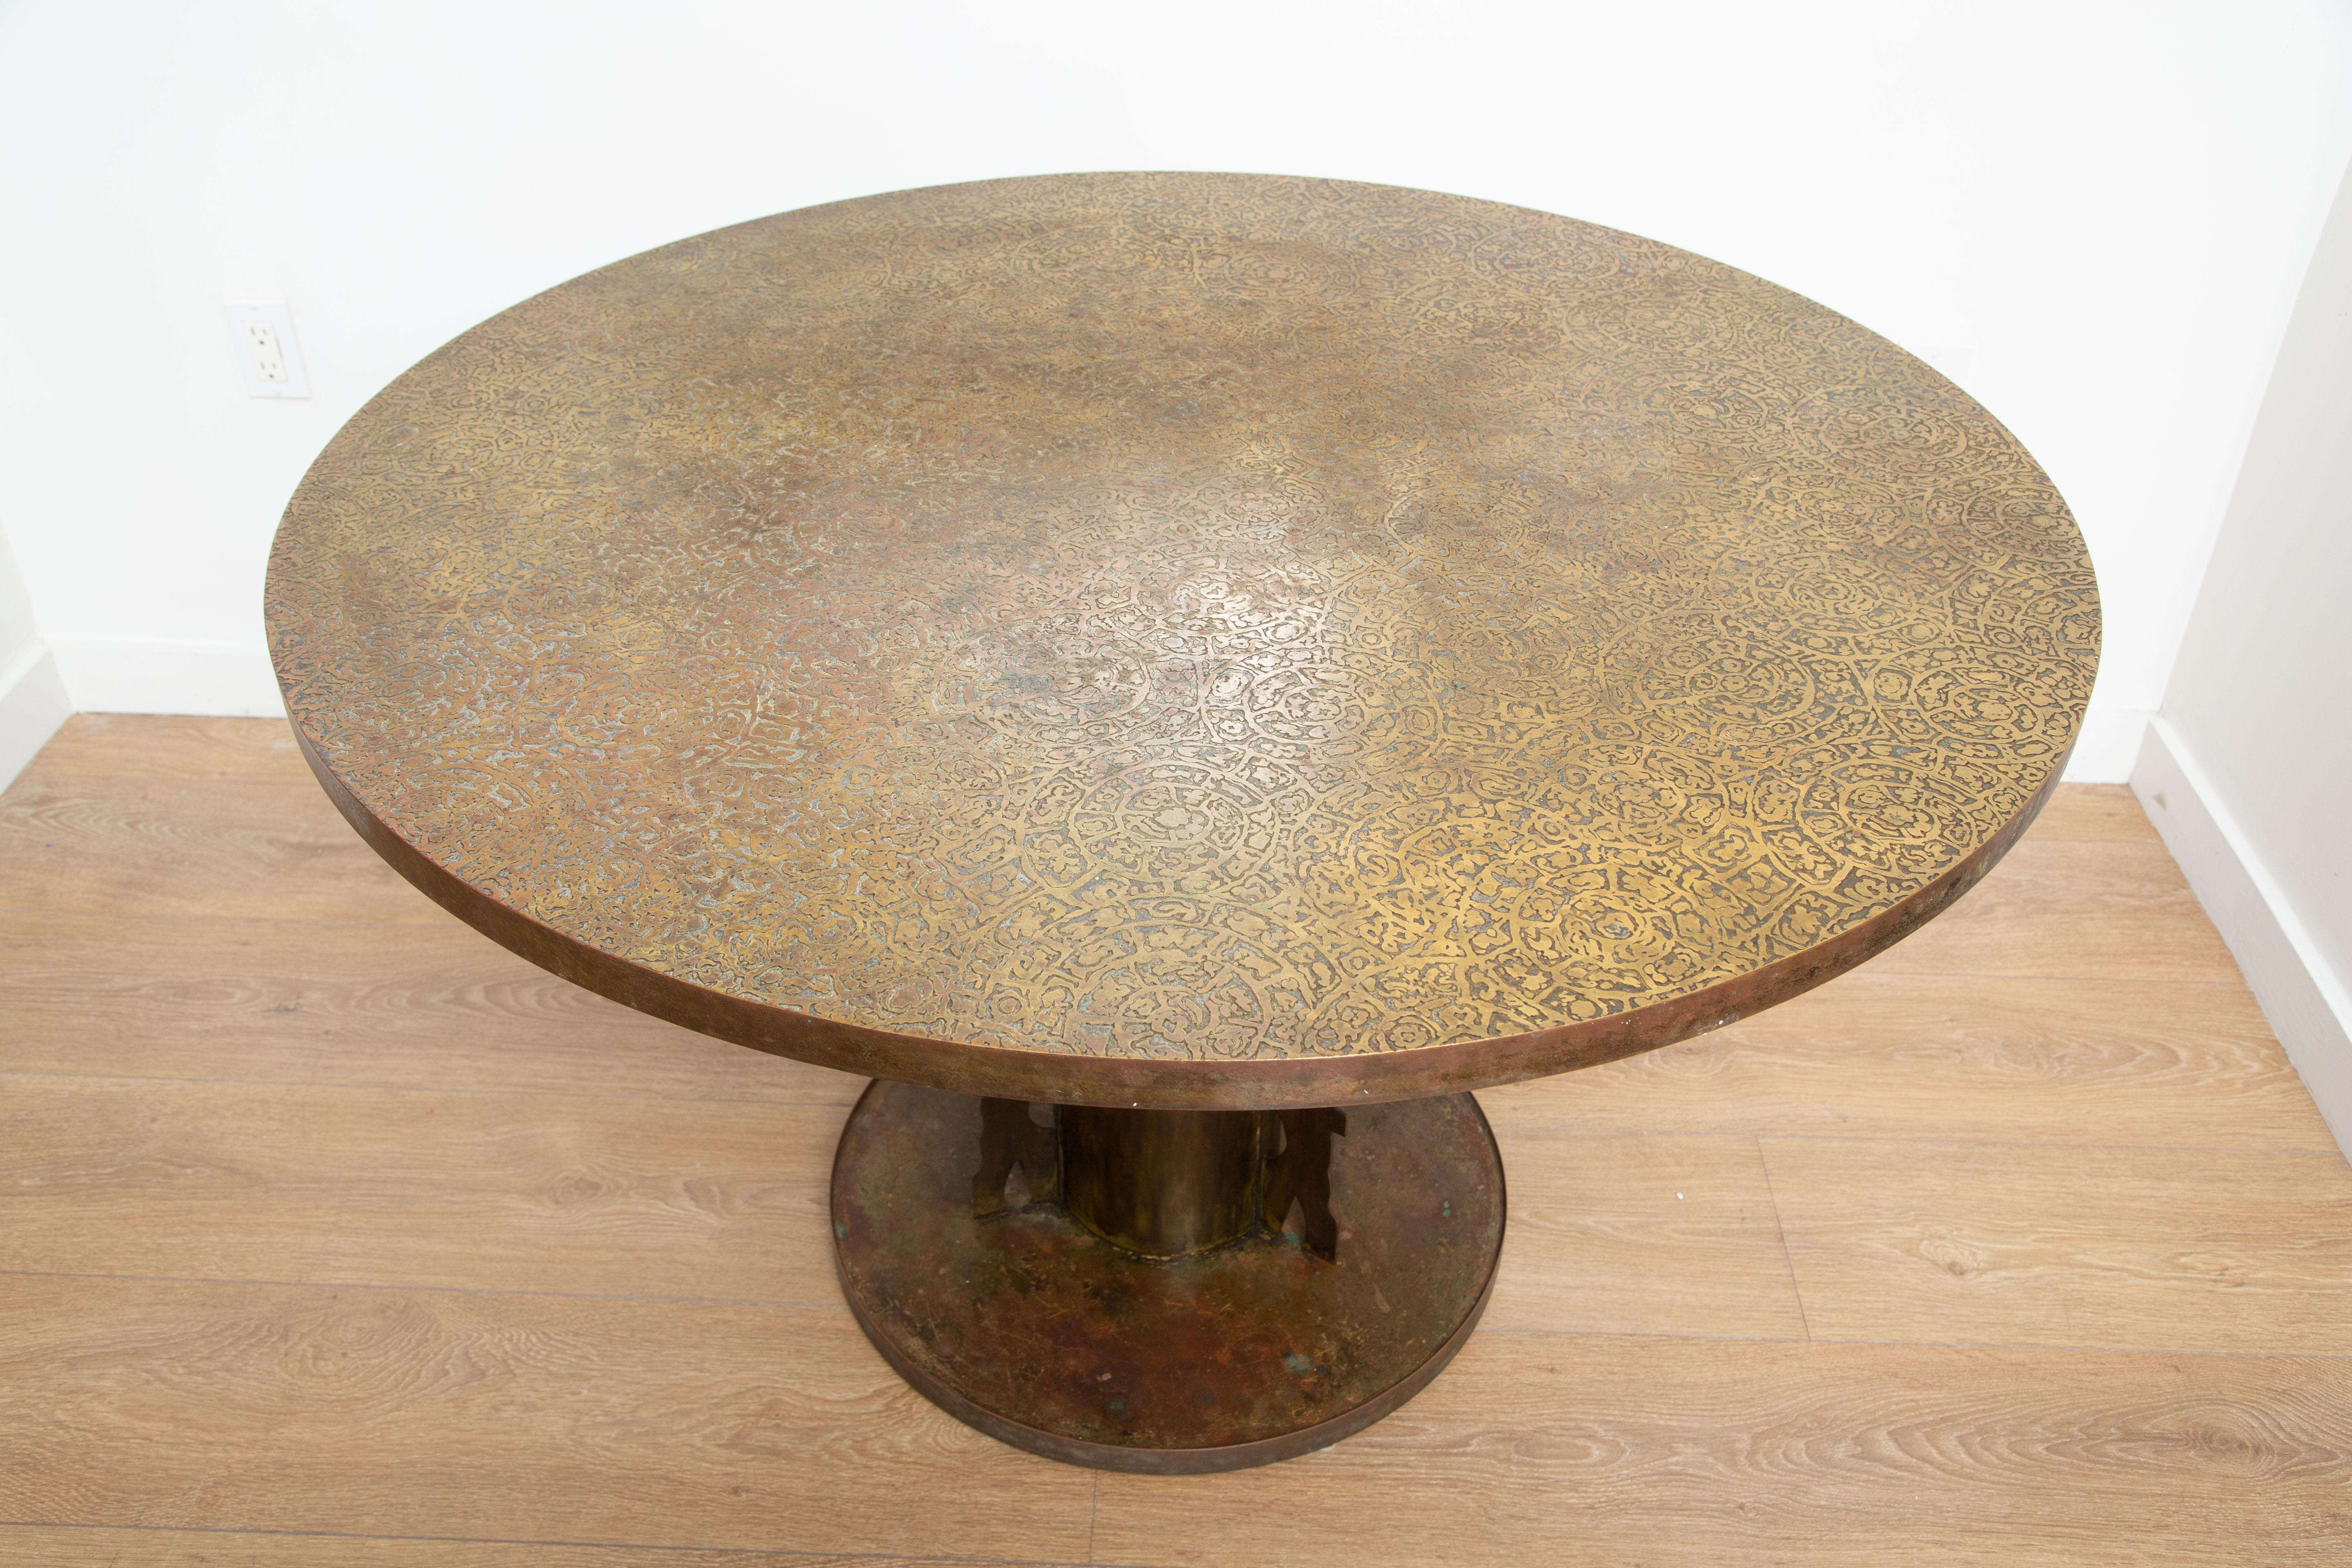 Philip and Kelvin LaVerne etruscan center table, New York, circa 1960's,
Bronze, hand sculptured, inlaid with pewter, buried in earth to attain natural and subtle patinas. Depicting Etruscan spiral patterns
Etched signature to the base. 
Excellent